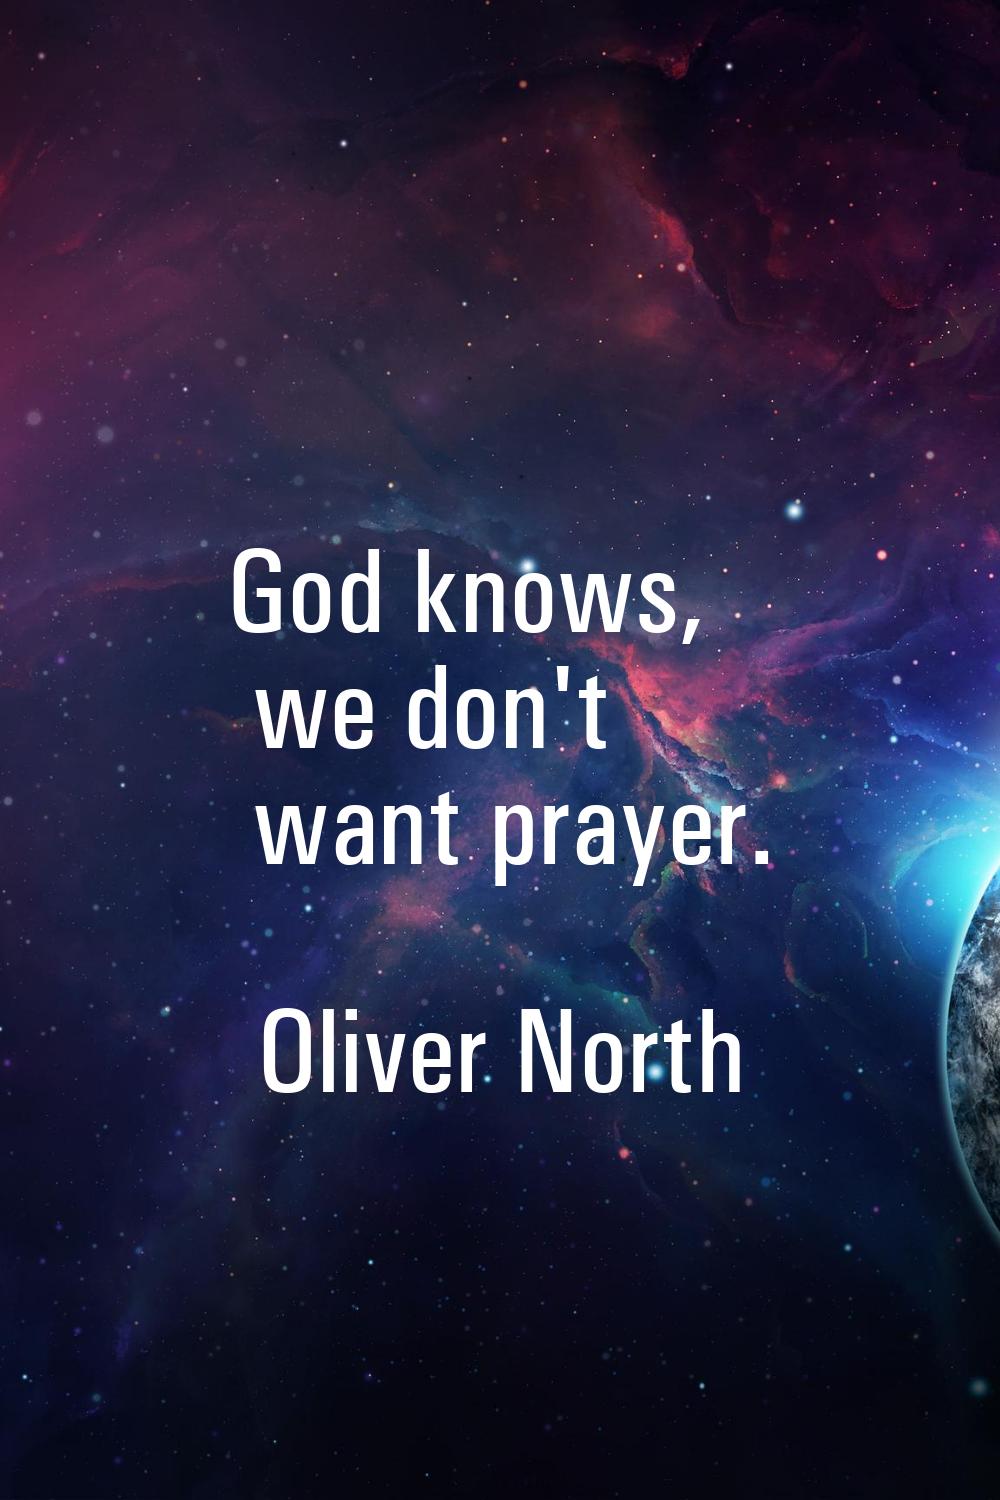 God knows, we don't want prayer.